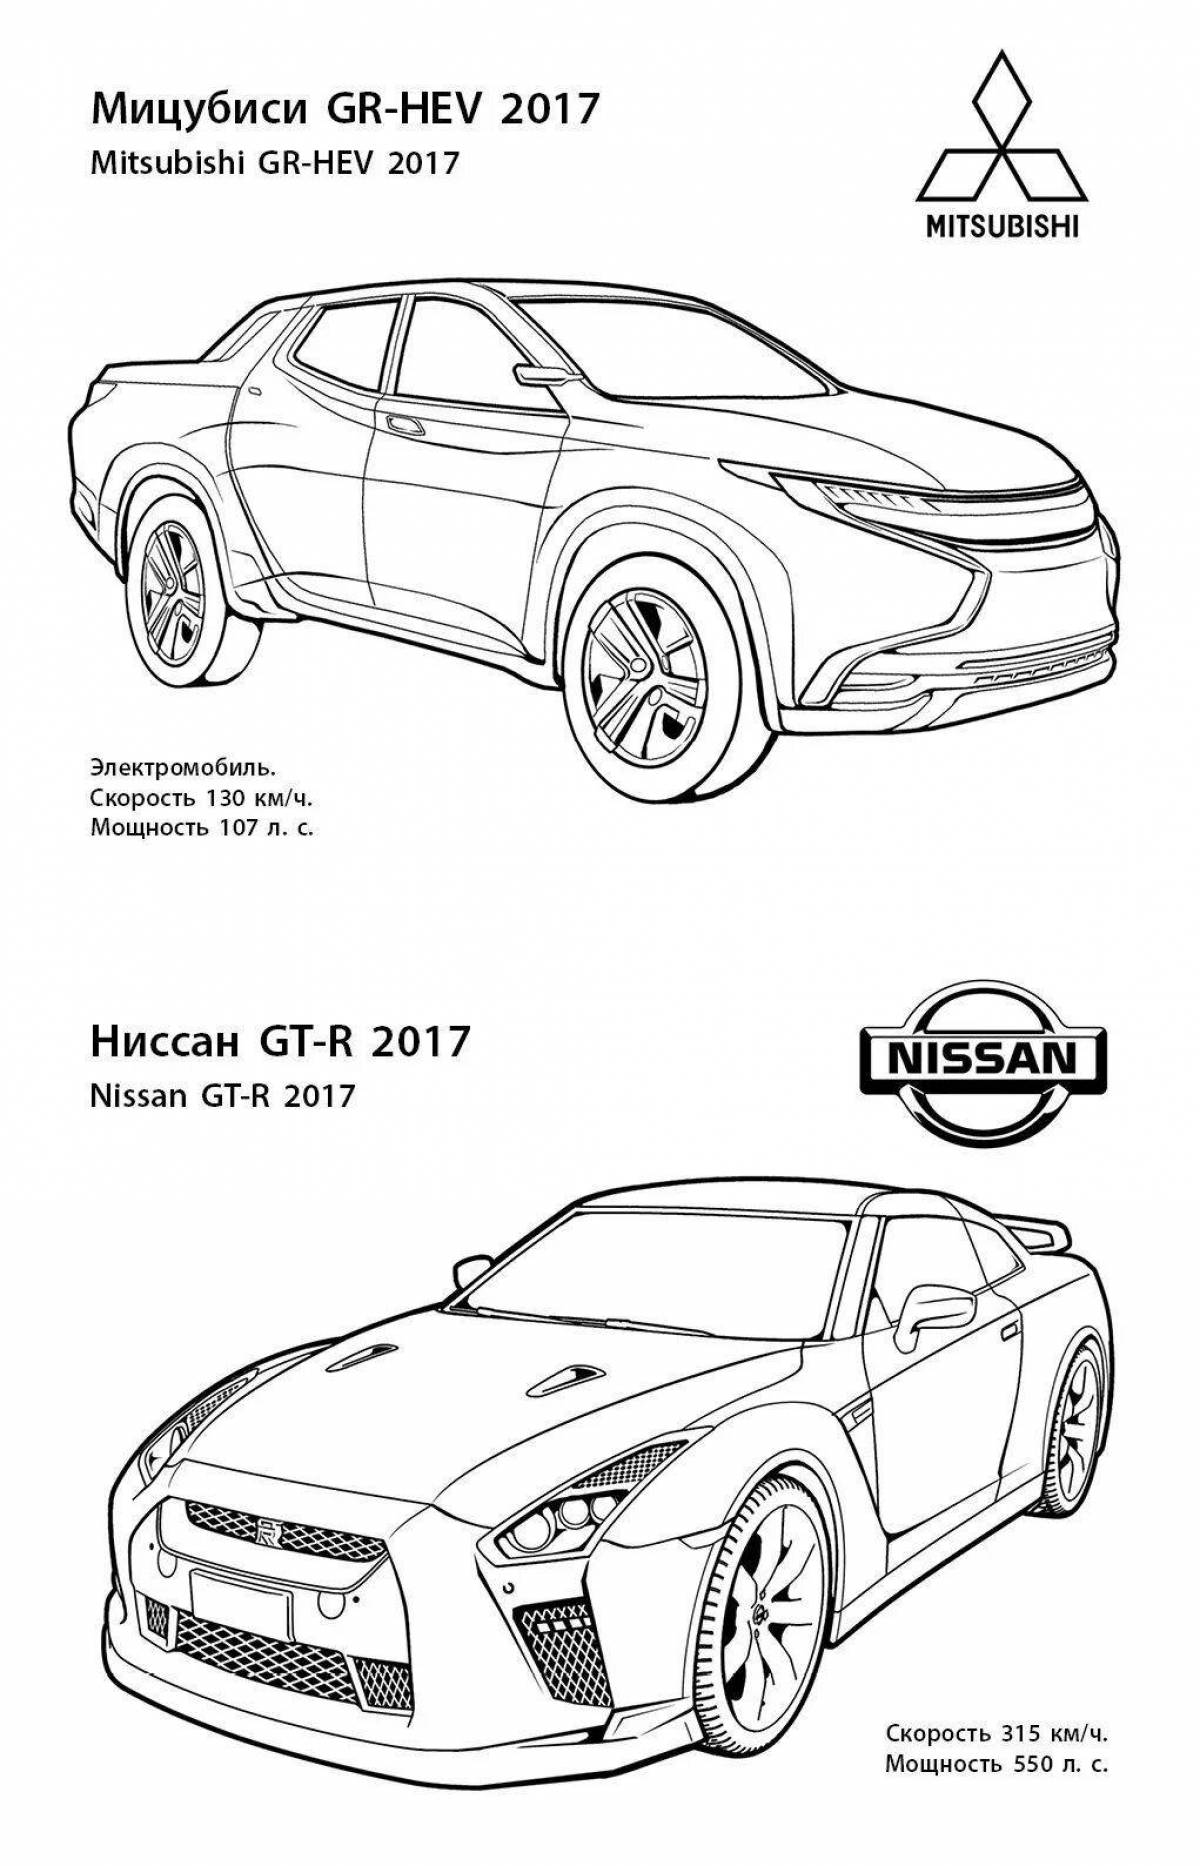 Amazing coloring pages of supercars magazine